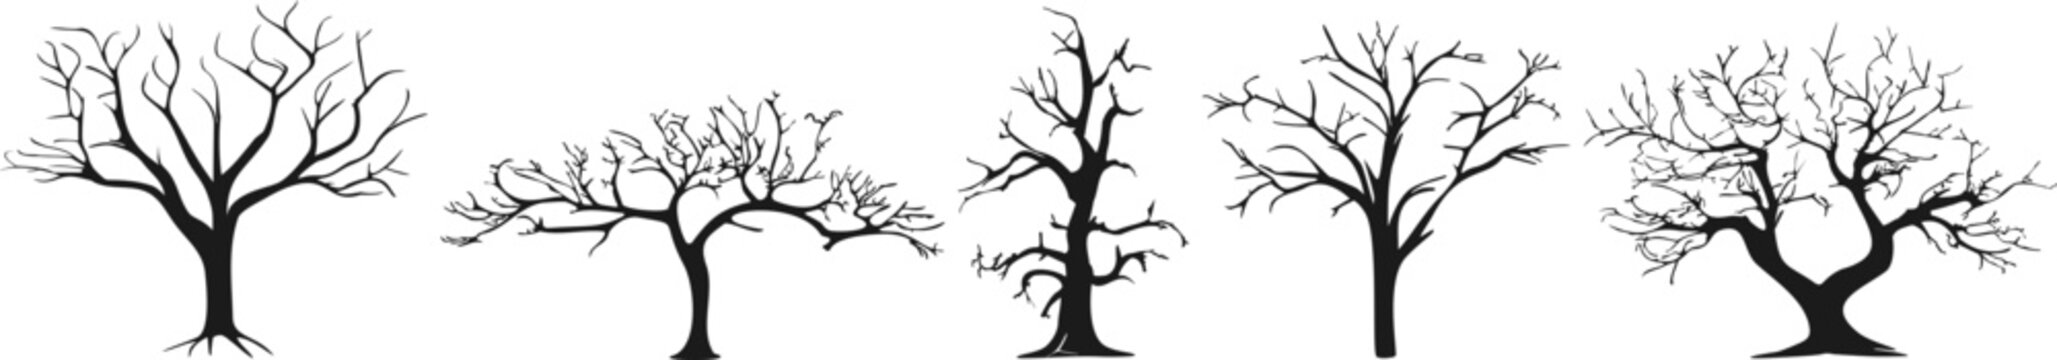 Tree silhouette. Collection of black contours of trees without leaves. Various trees in different positions. Forest set in flat style. Vector illustration.